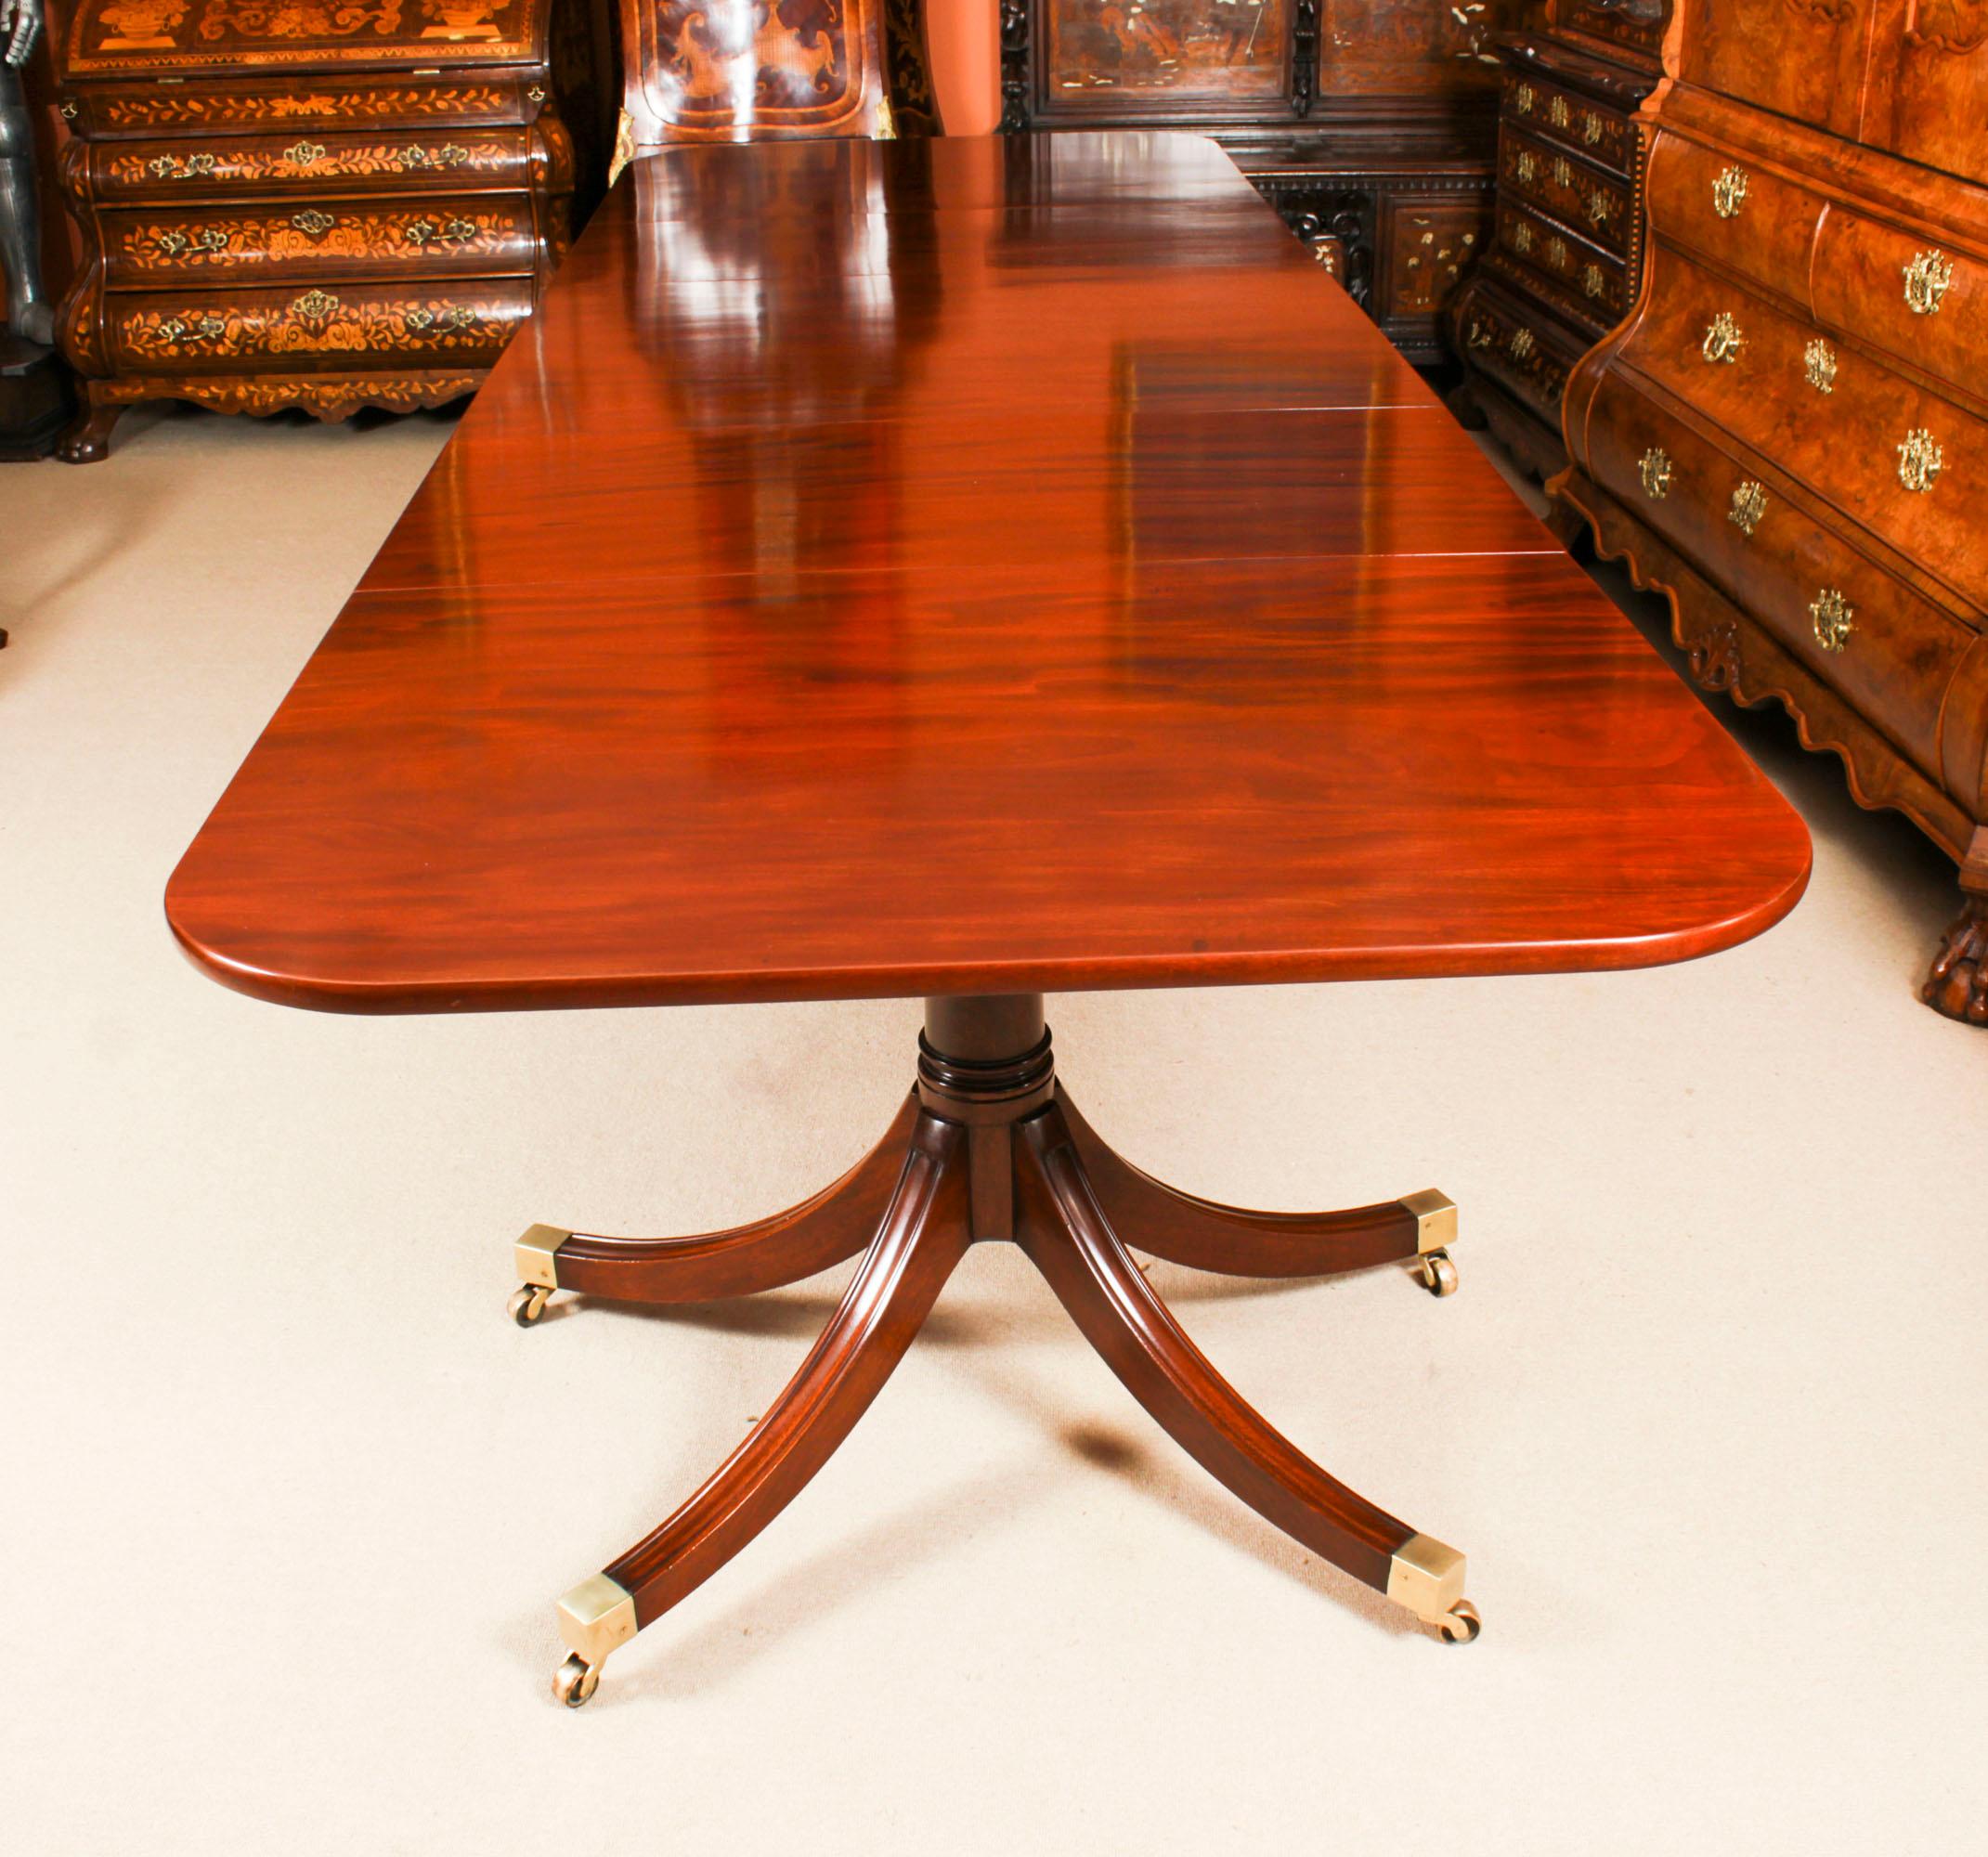 Antique 12ft Regency Triple Pillar Dining Table & 12 Chairs 19th Century In Good Condition For Sale In London, GB